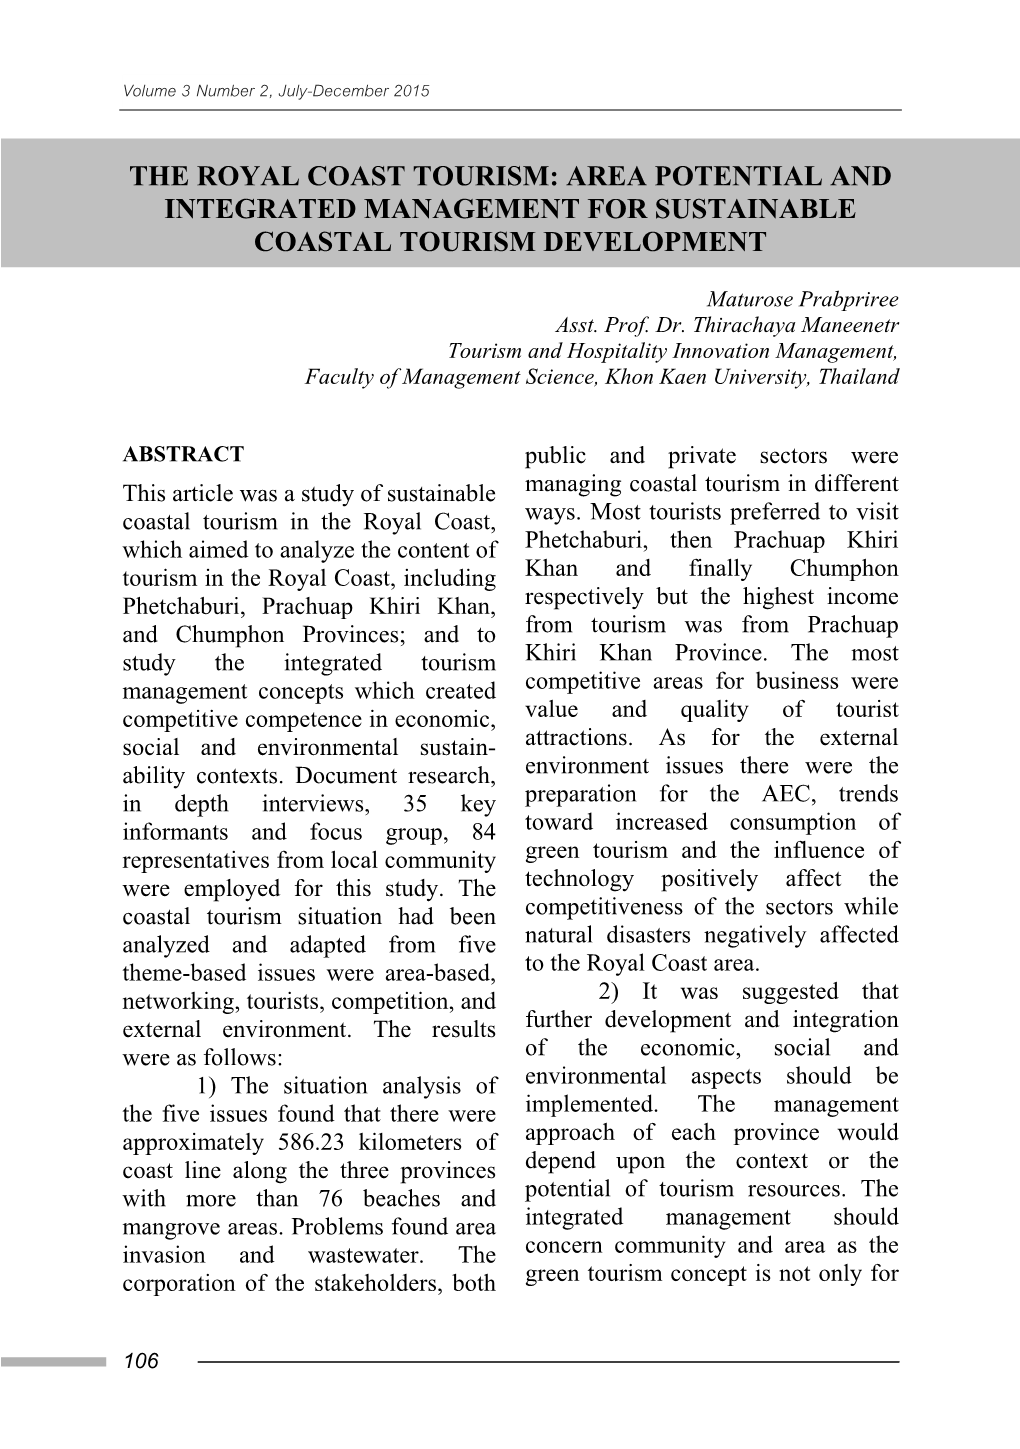 The Royal Coast Tourism: Area Potential and Integrated Management for Sustainable Coastal Tourism Development